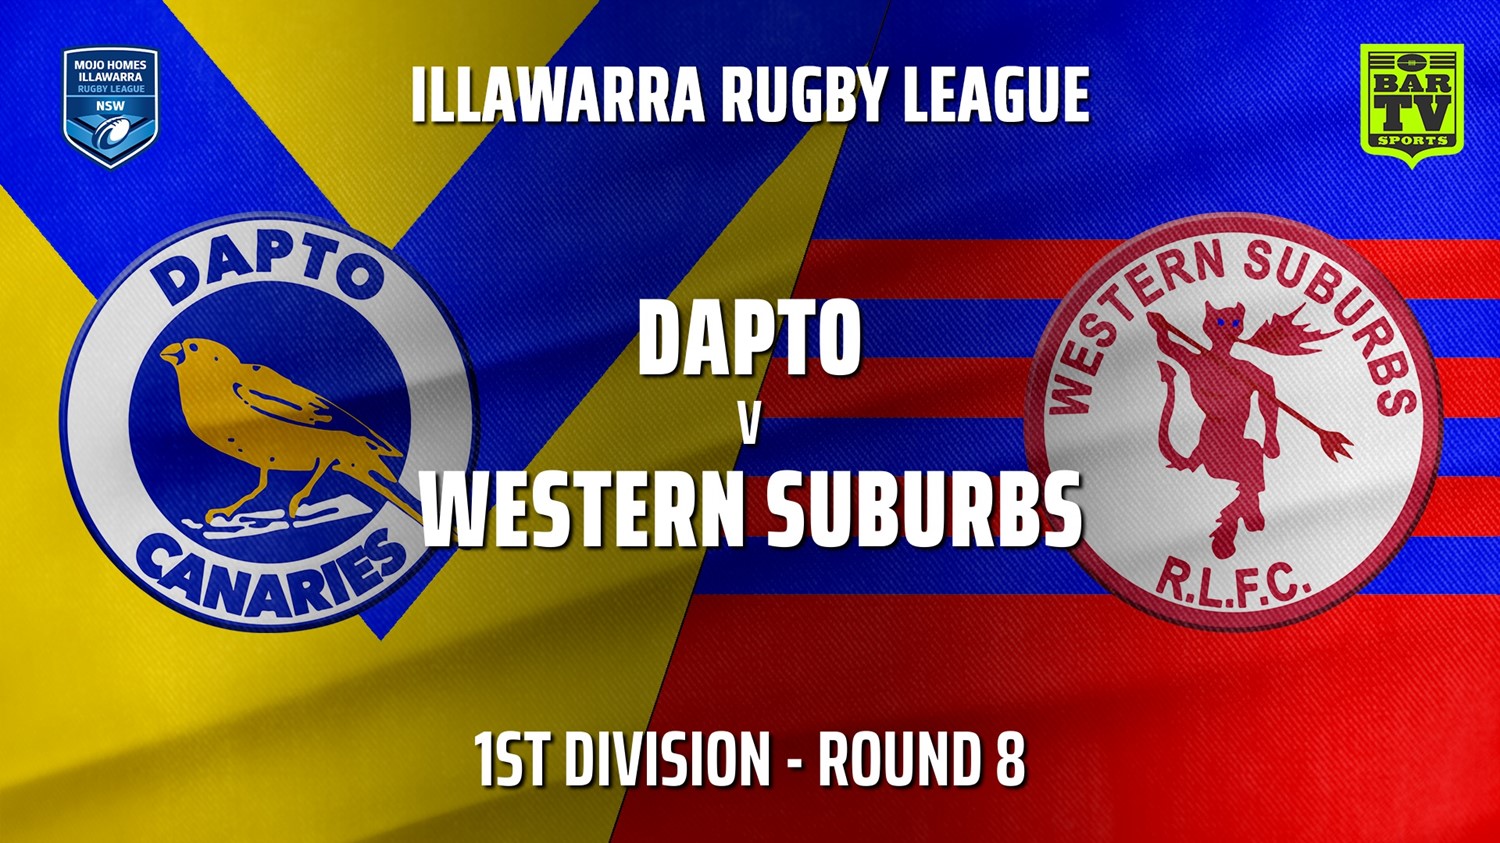 210605-IRL Round 8 - 1st Division - Dapto Canaries v Western Suburbs Devils Slate Image